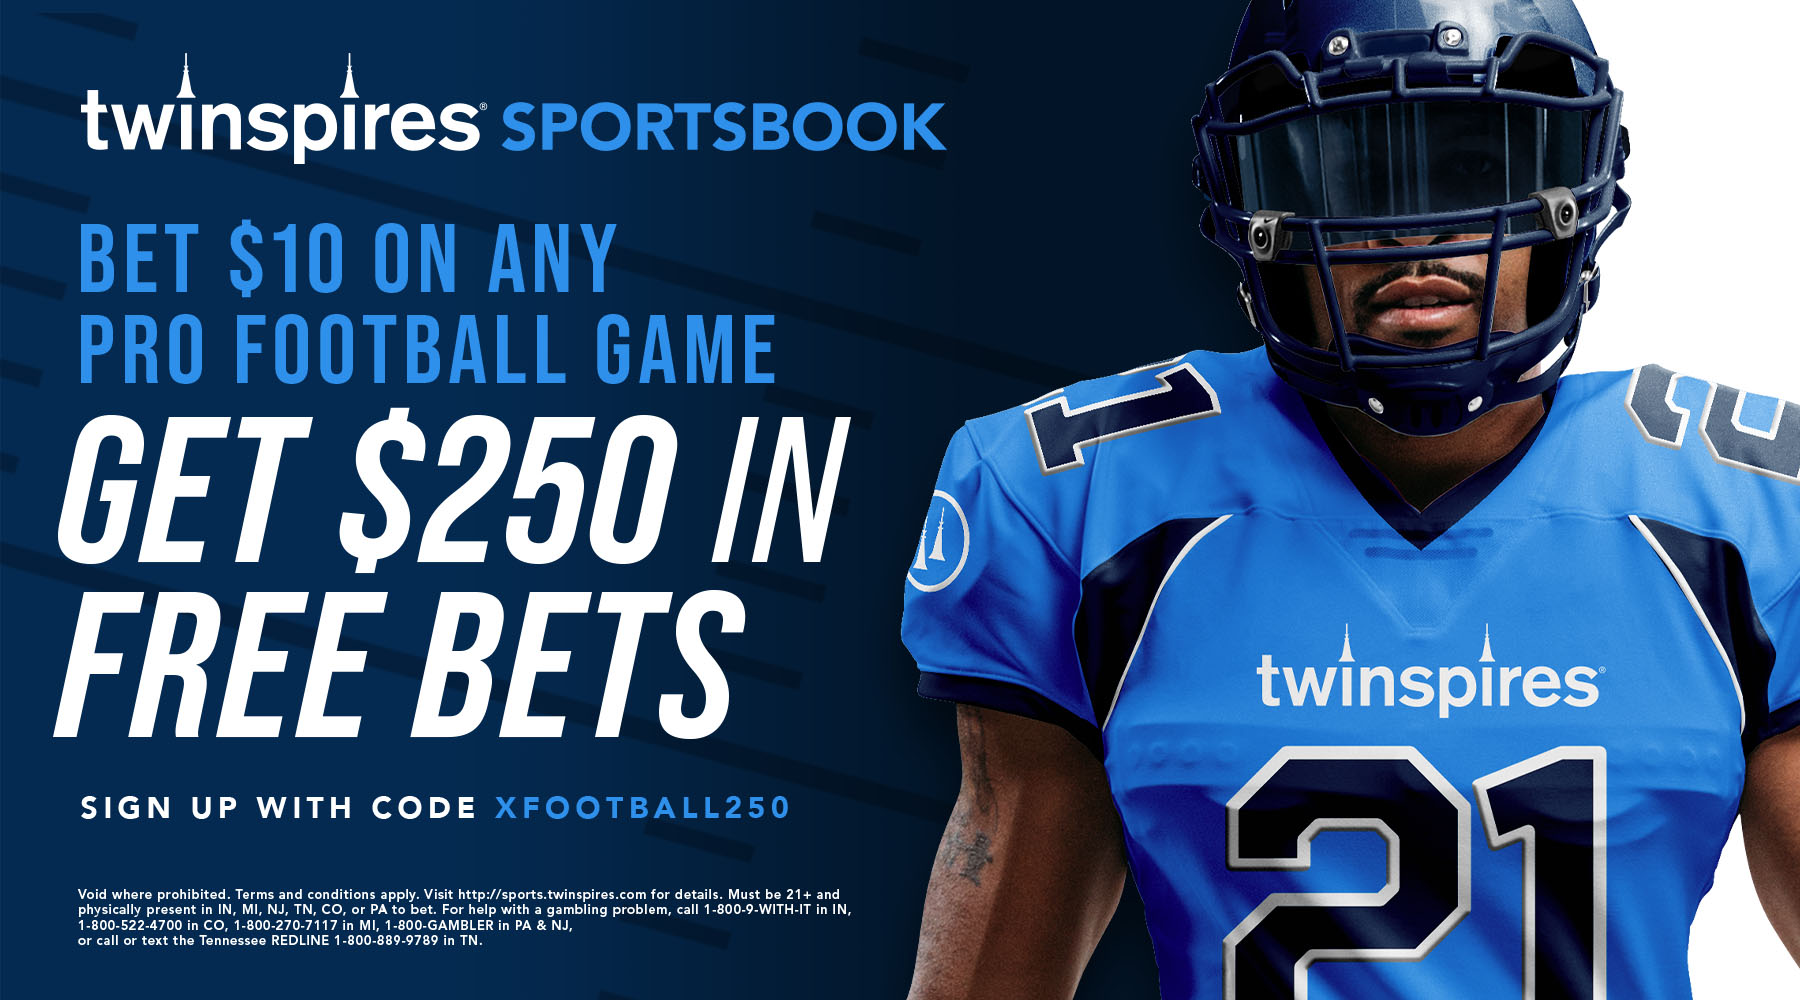 twinspires Sportsbook $250 in Free Bets